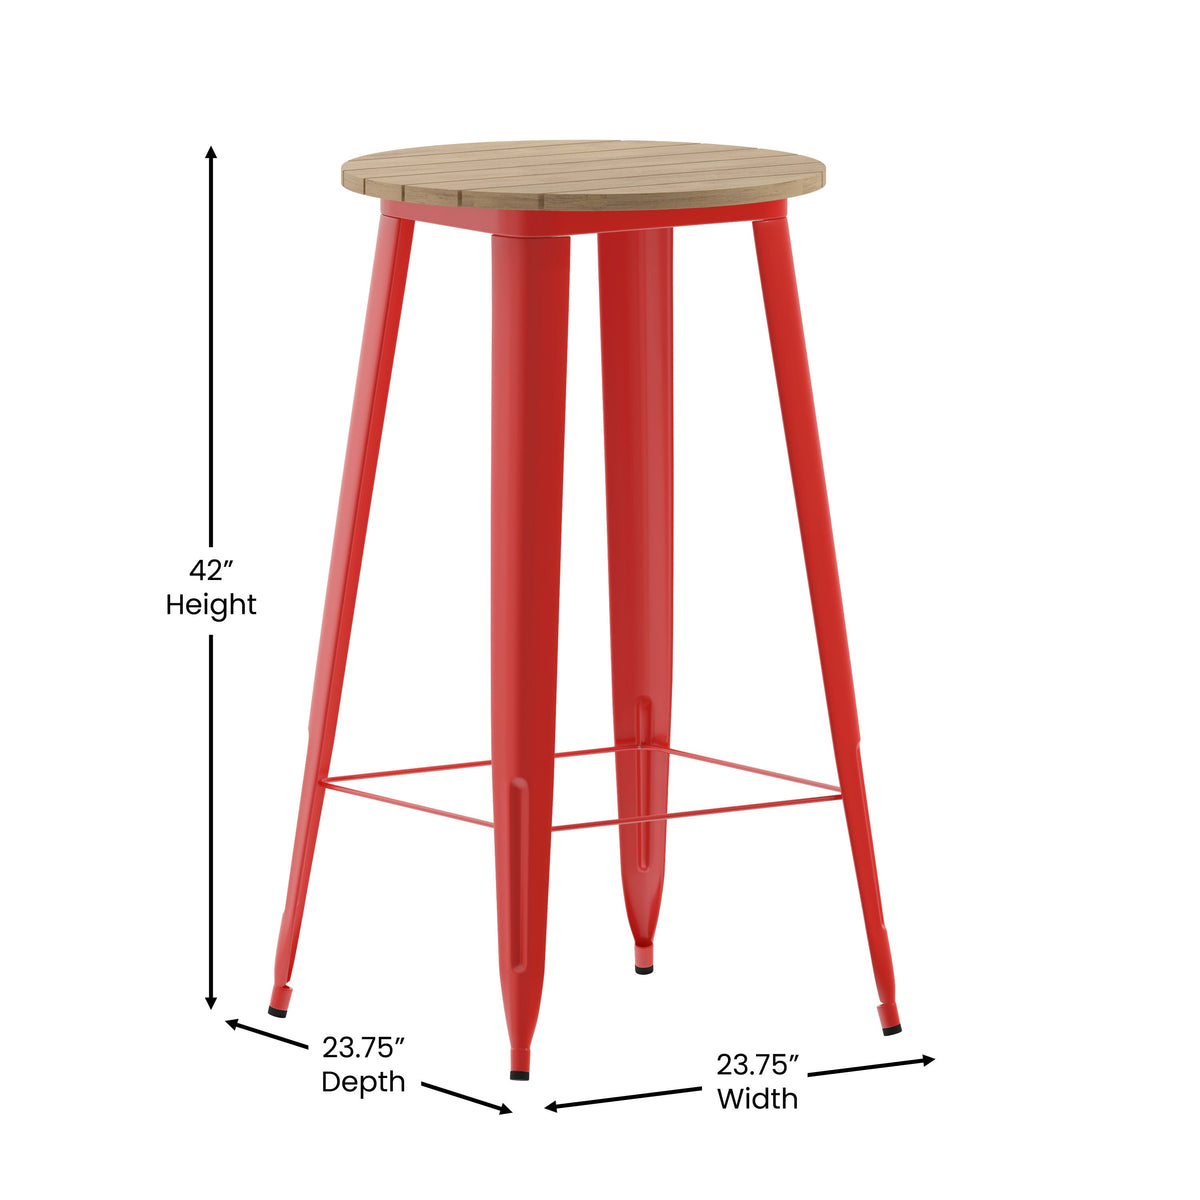 Brown/Red |#| 23.75inch RD Commercial Poly Bar Top Restaurant Table with Steel Frame-Brown/Red